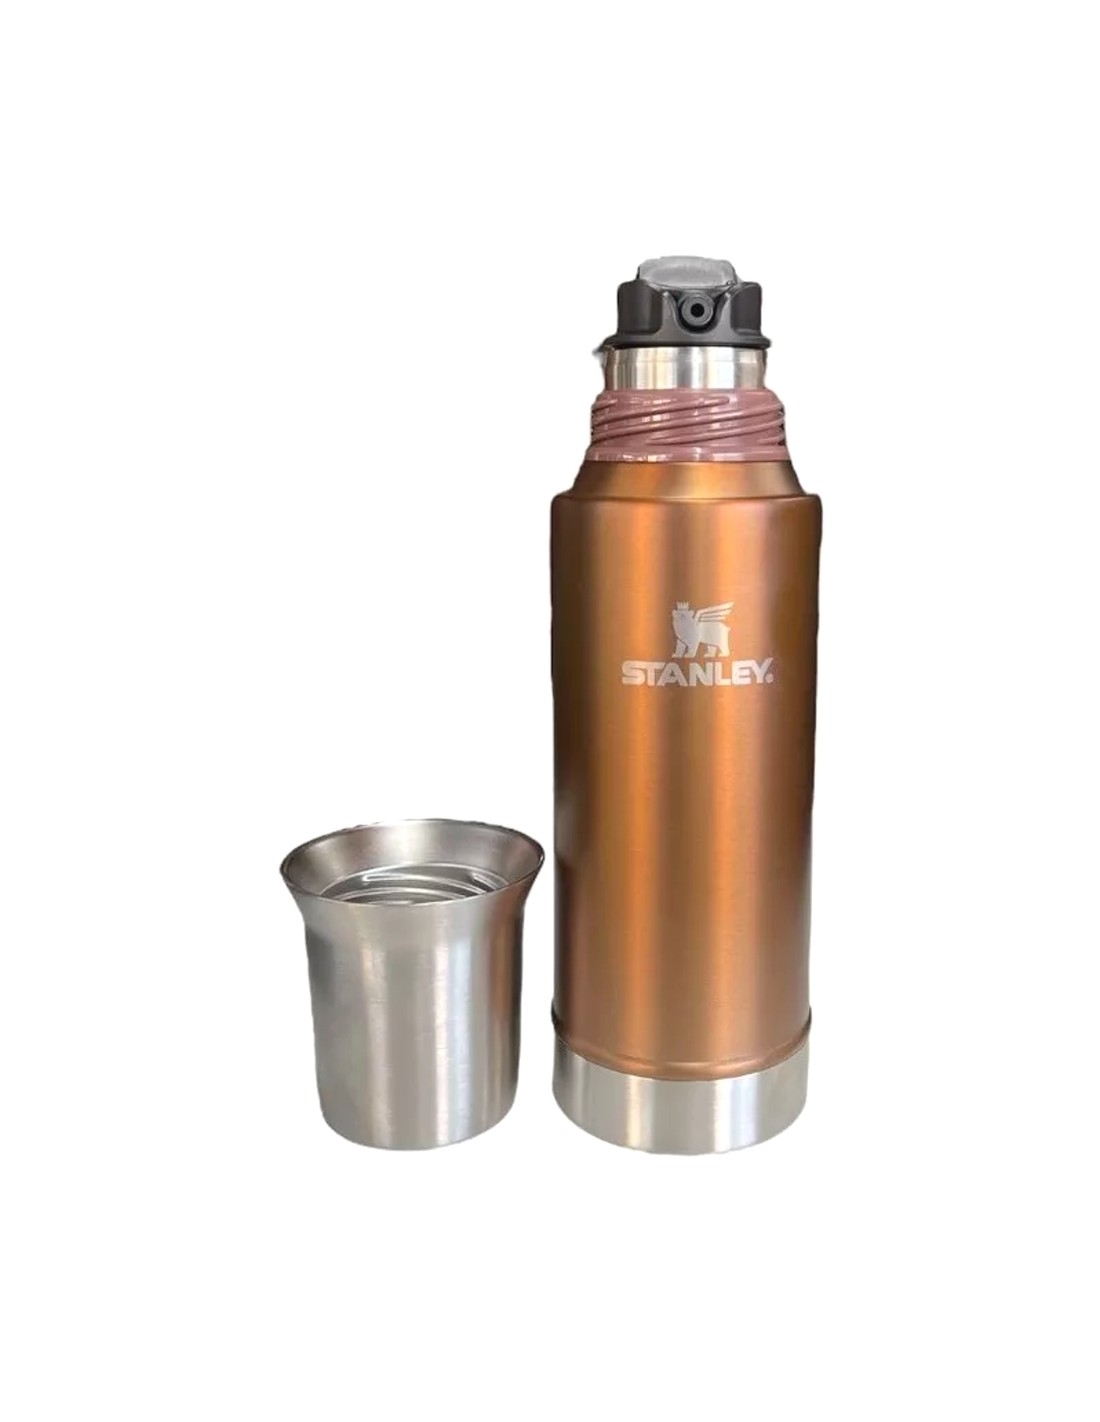 THERMOS MATE SYSTEM STANLEY CLASSIC 1.2 LTS – Stanley1913Store